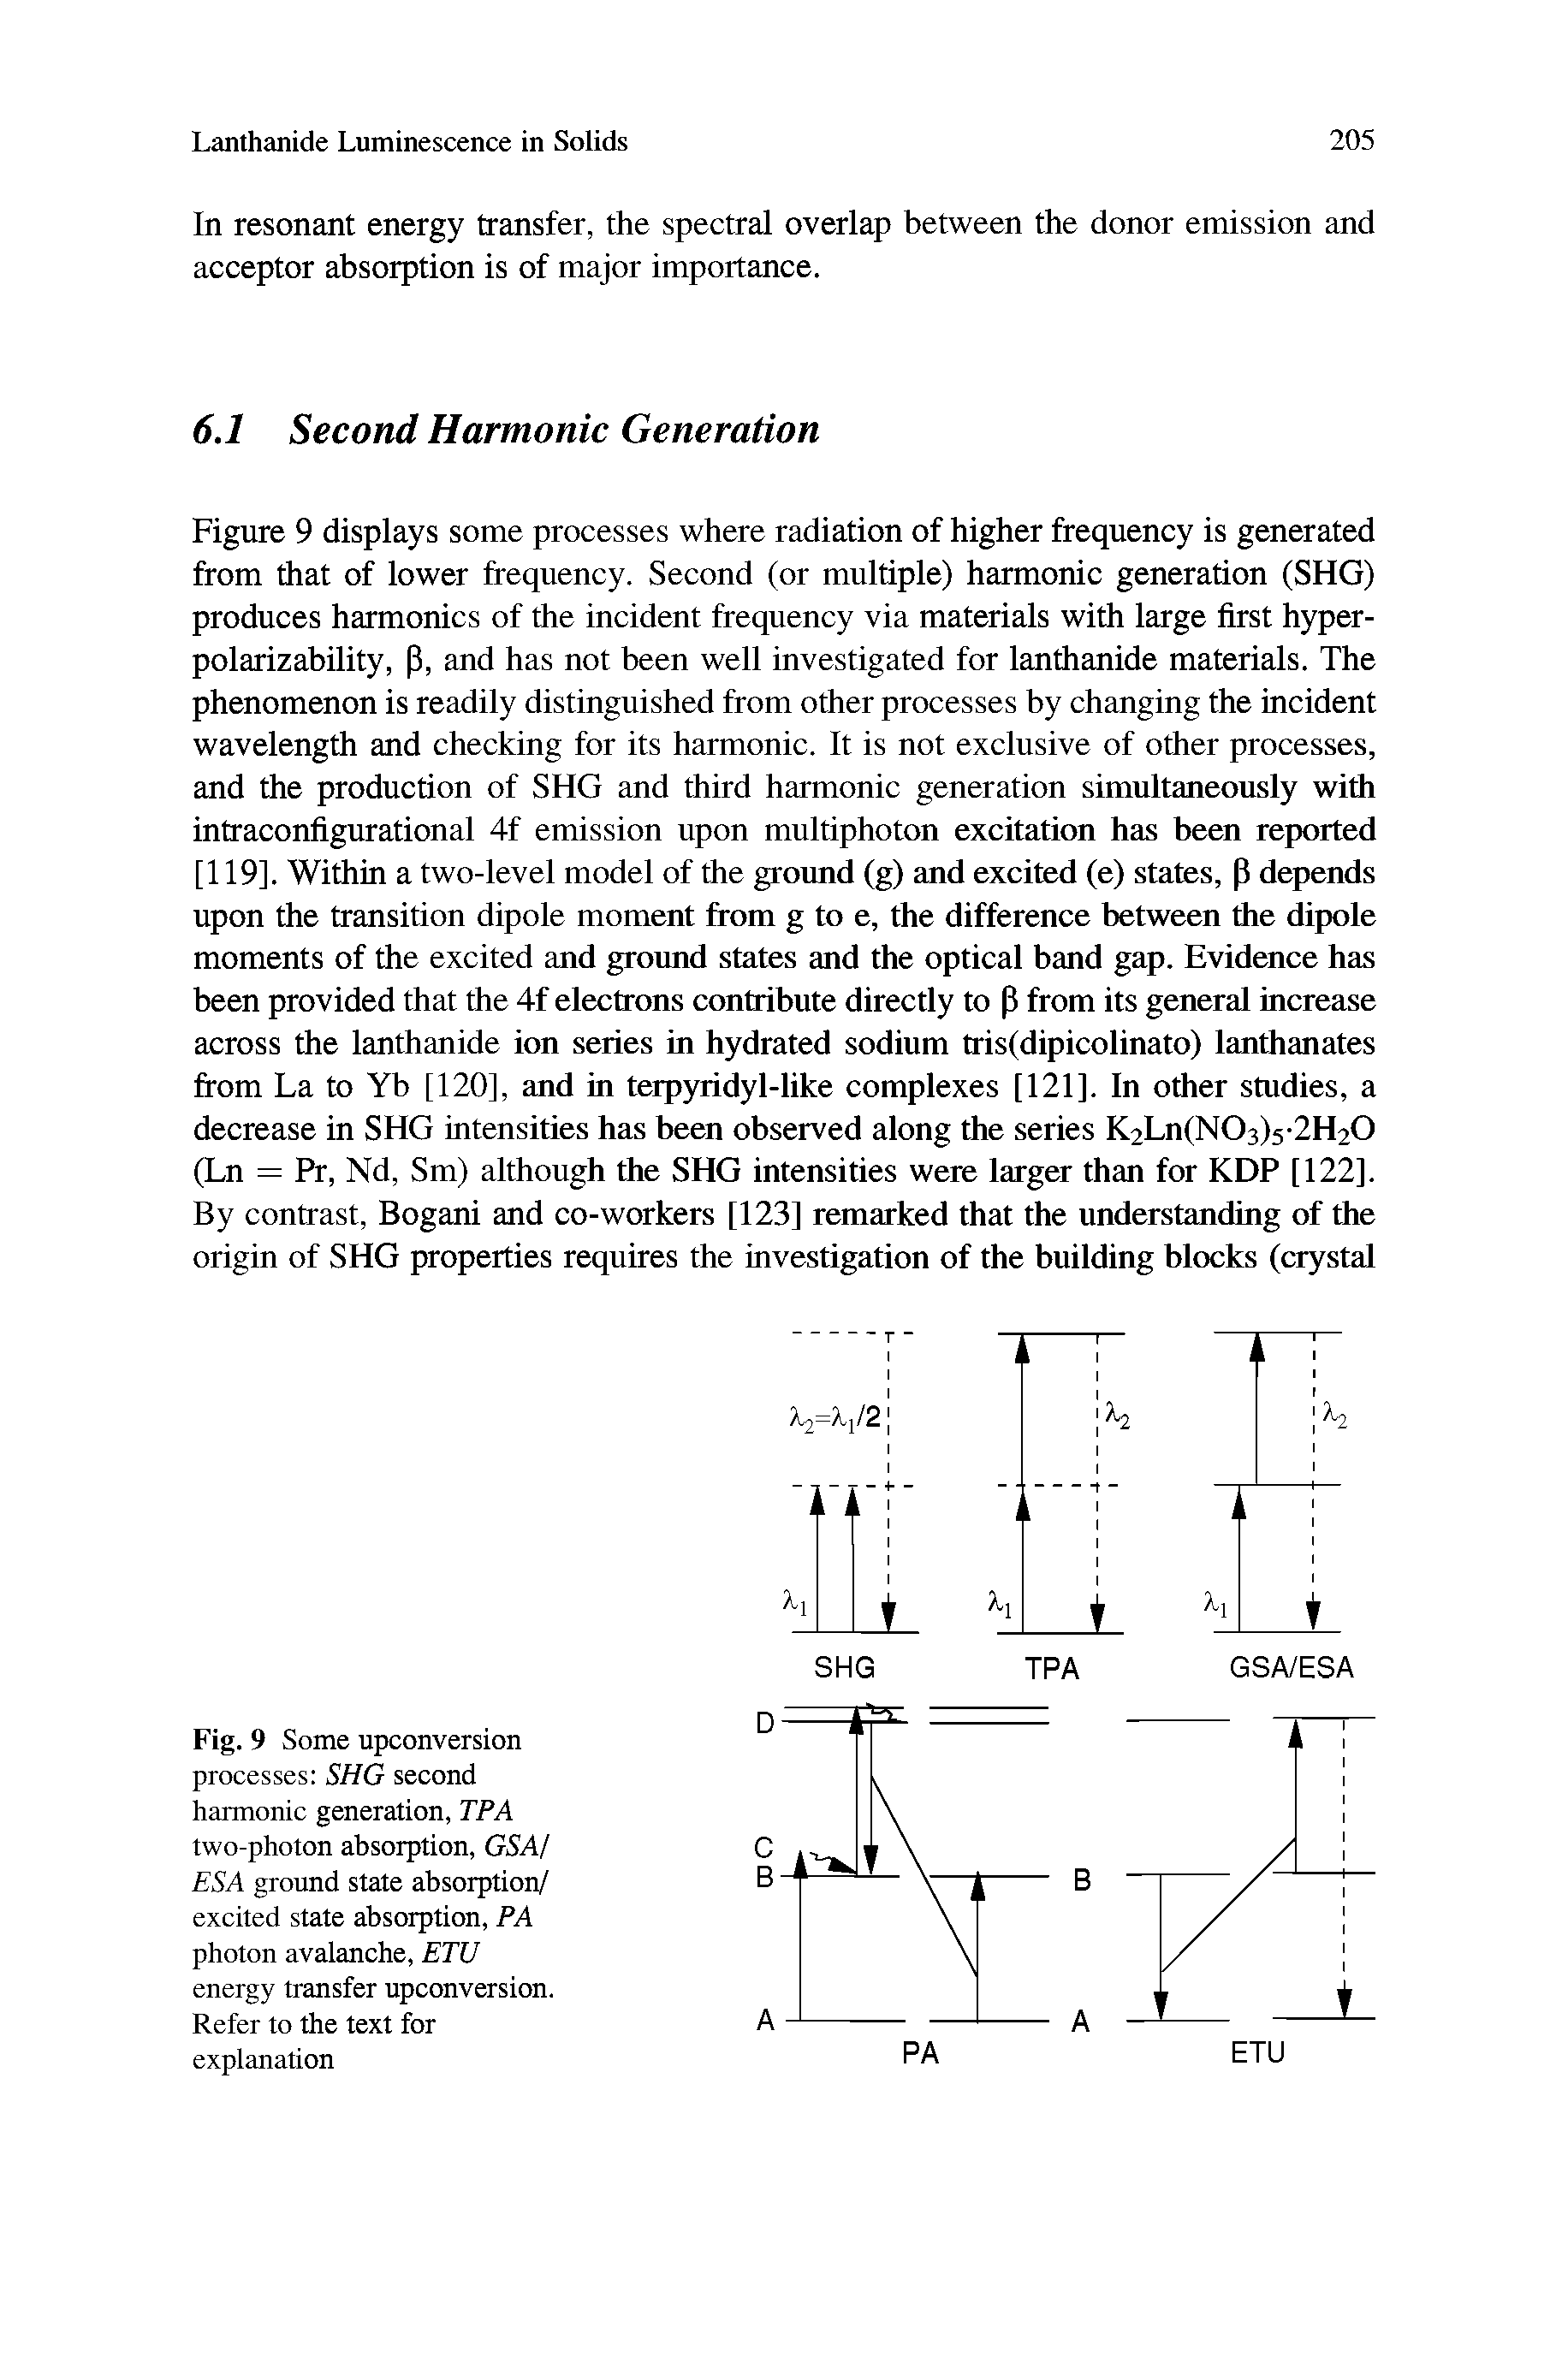 Fig. 9 Some upconversion processes SHG second harmonic generation, TP A two-photon absorption, GSAj ESA ground state absorption/ excited state absorption, PA photon avalanche, ETU energy transfer upconversion. Refer to the text for explanation...